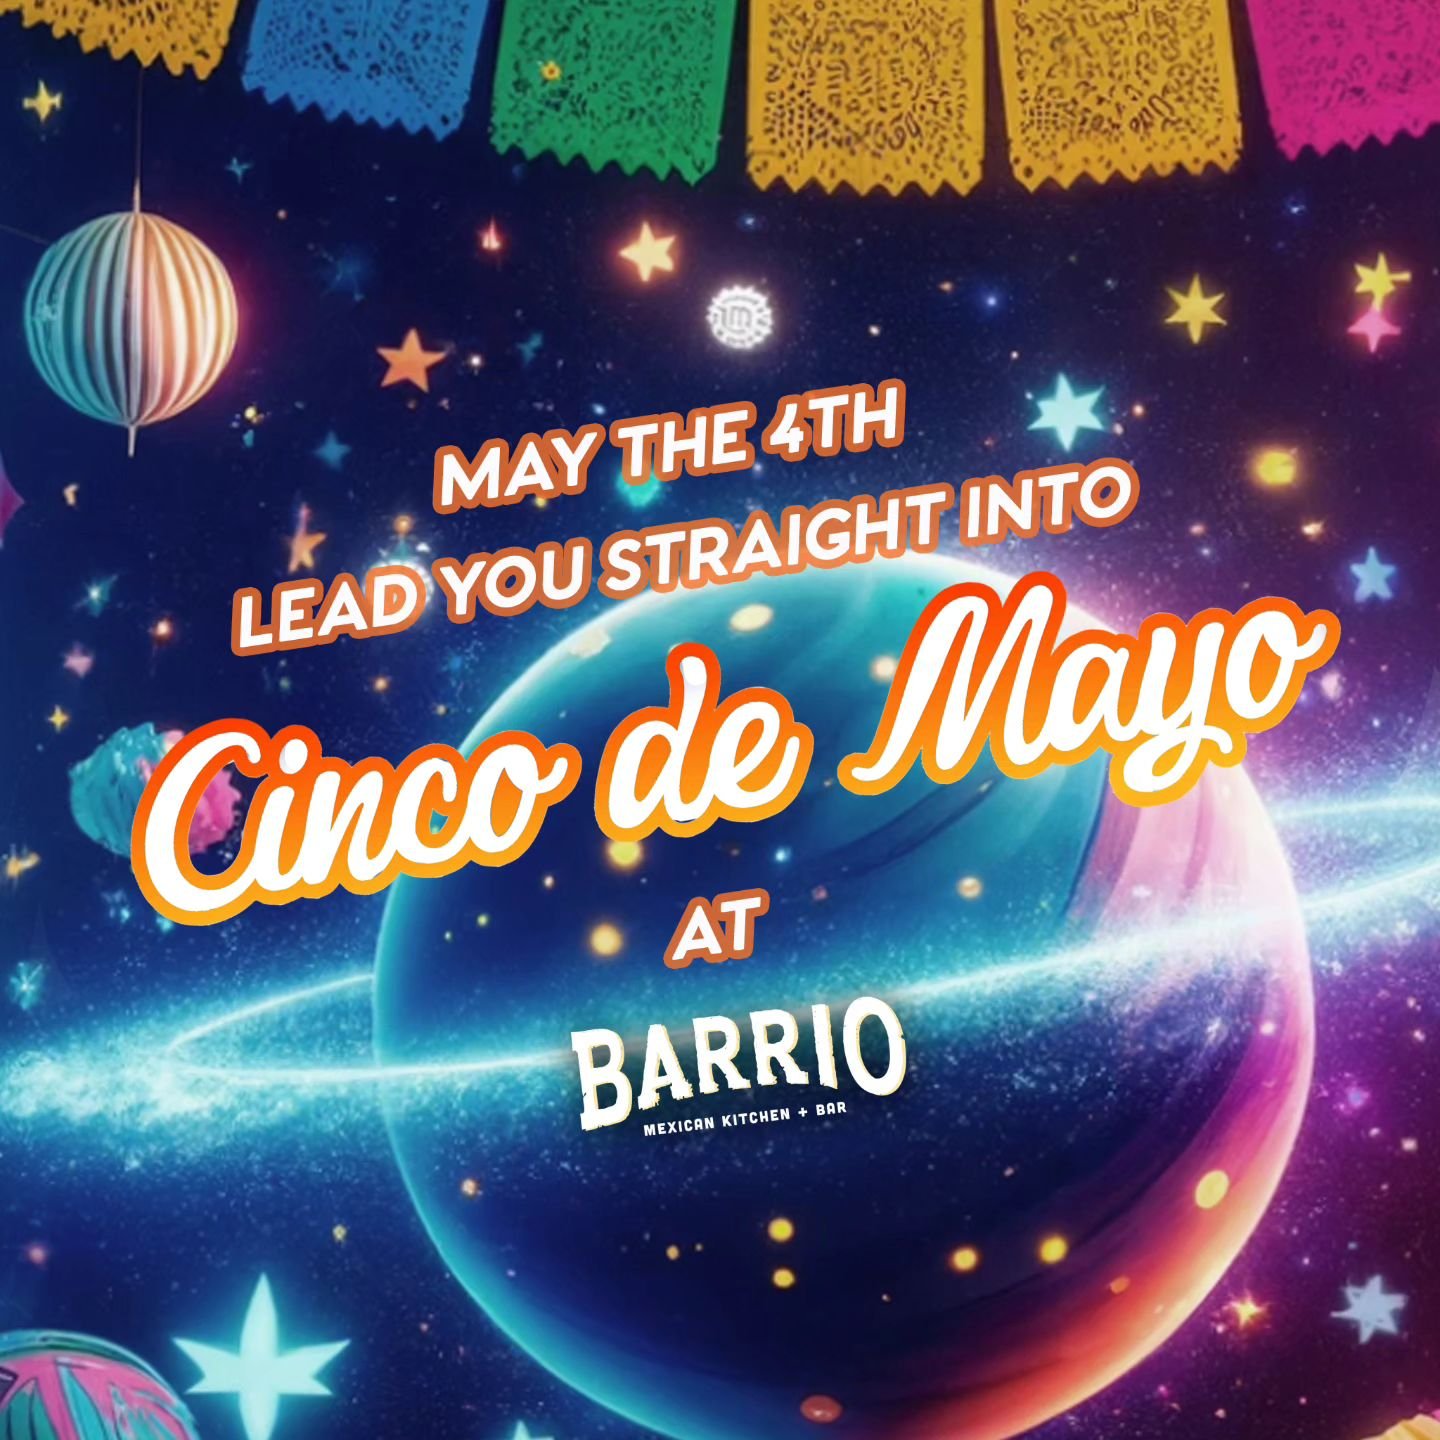 Happy #NationalStarWarsDay! 🪐💫
We can't wait to celebrate Cinco de Mayo with you tomorrow! 🎉💃

Learn more in our link in bio!
barriokc.com/cinco-de-mayo